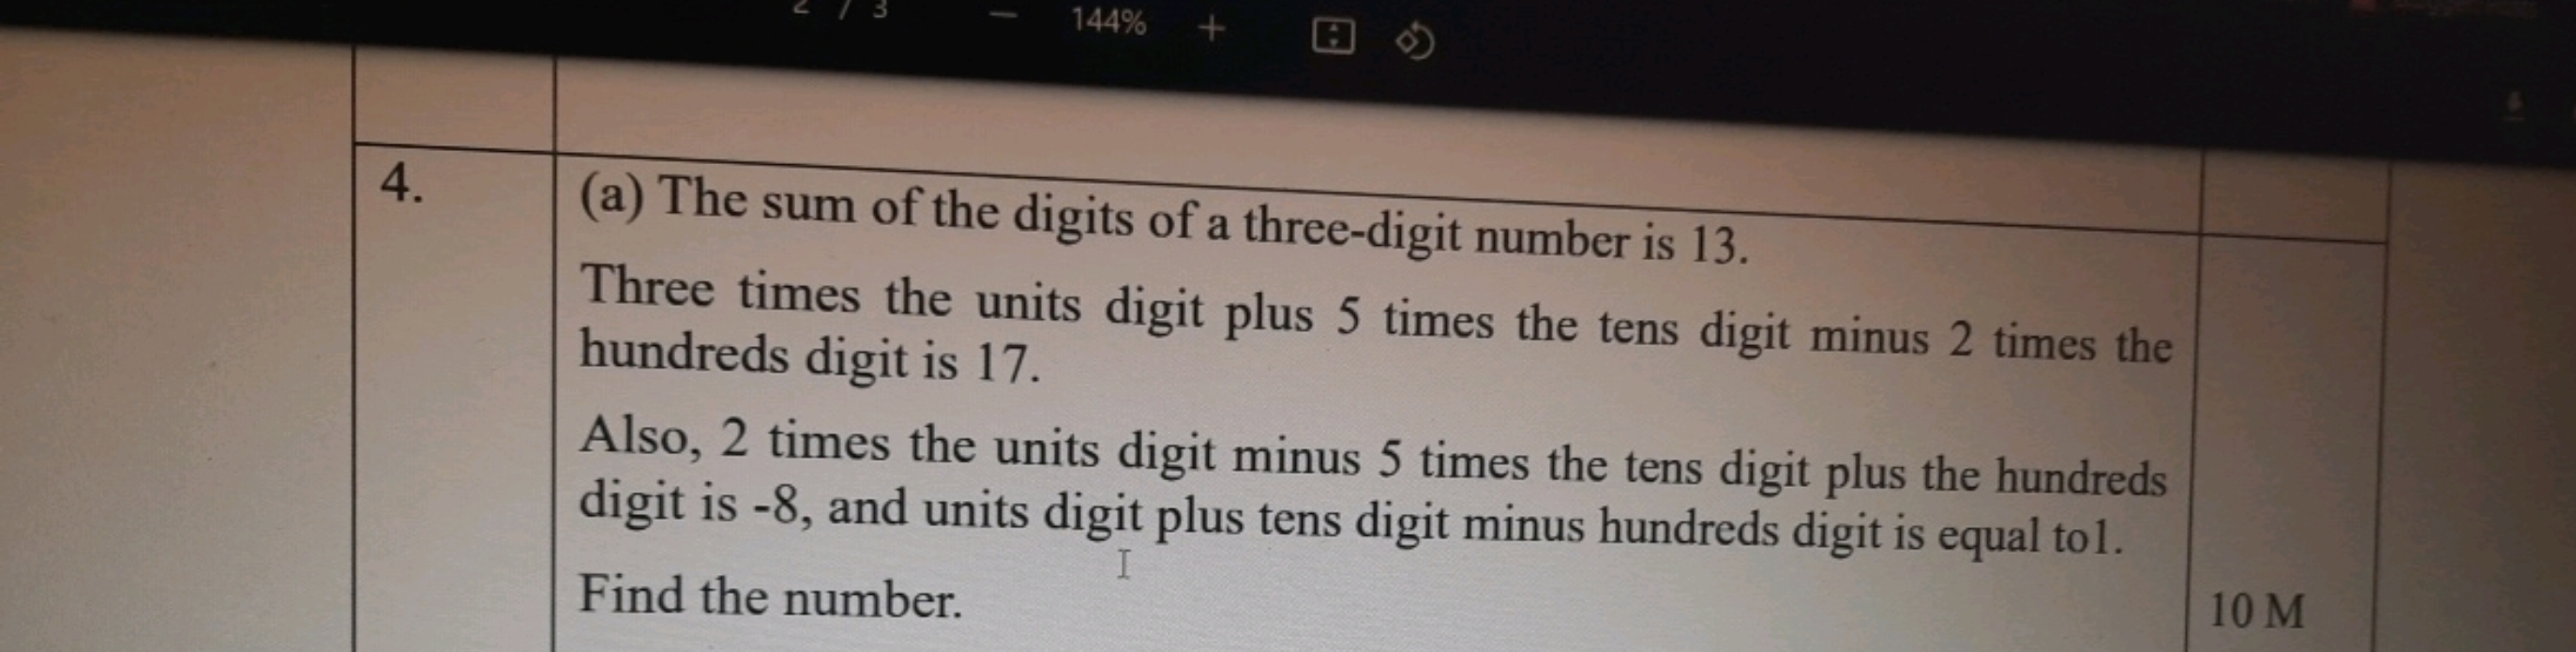 4.(a) The sum of the digits of a three-digit number is 13.Three times 